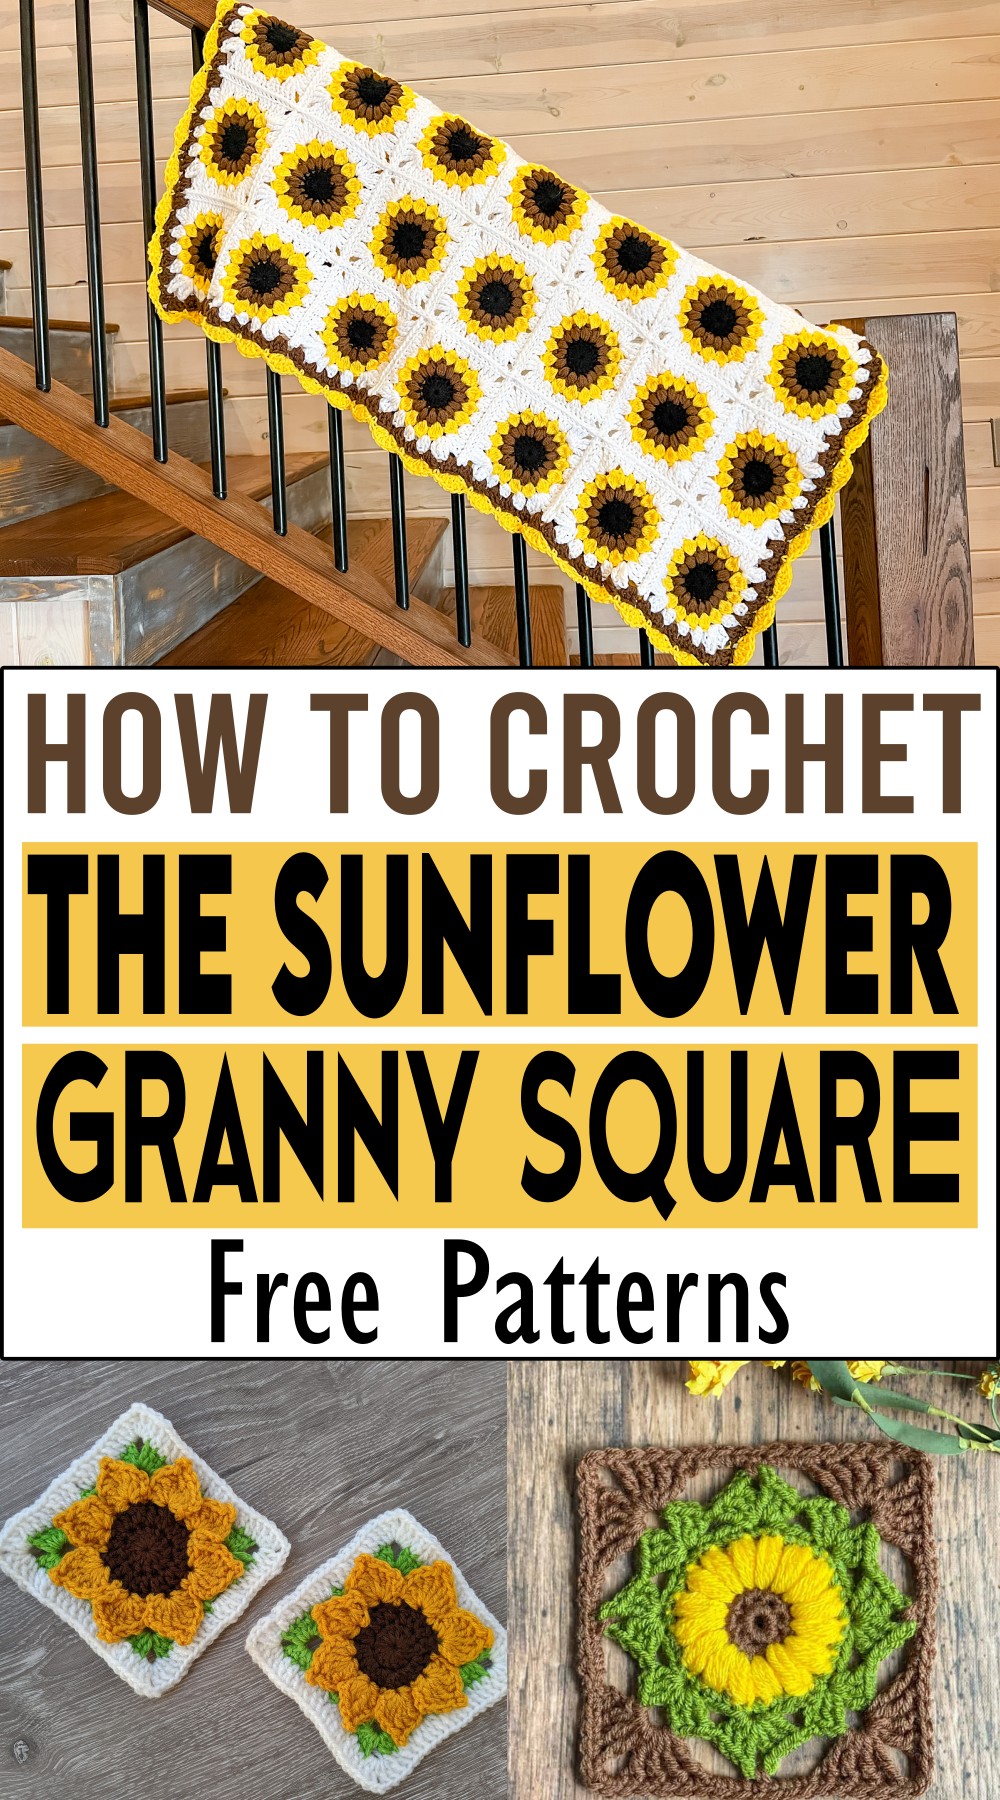 How to Crochet The Sunflower Granny Square 1